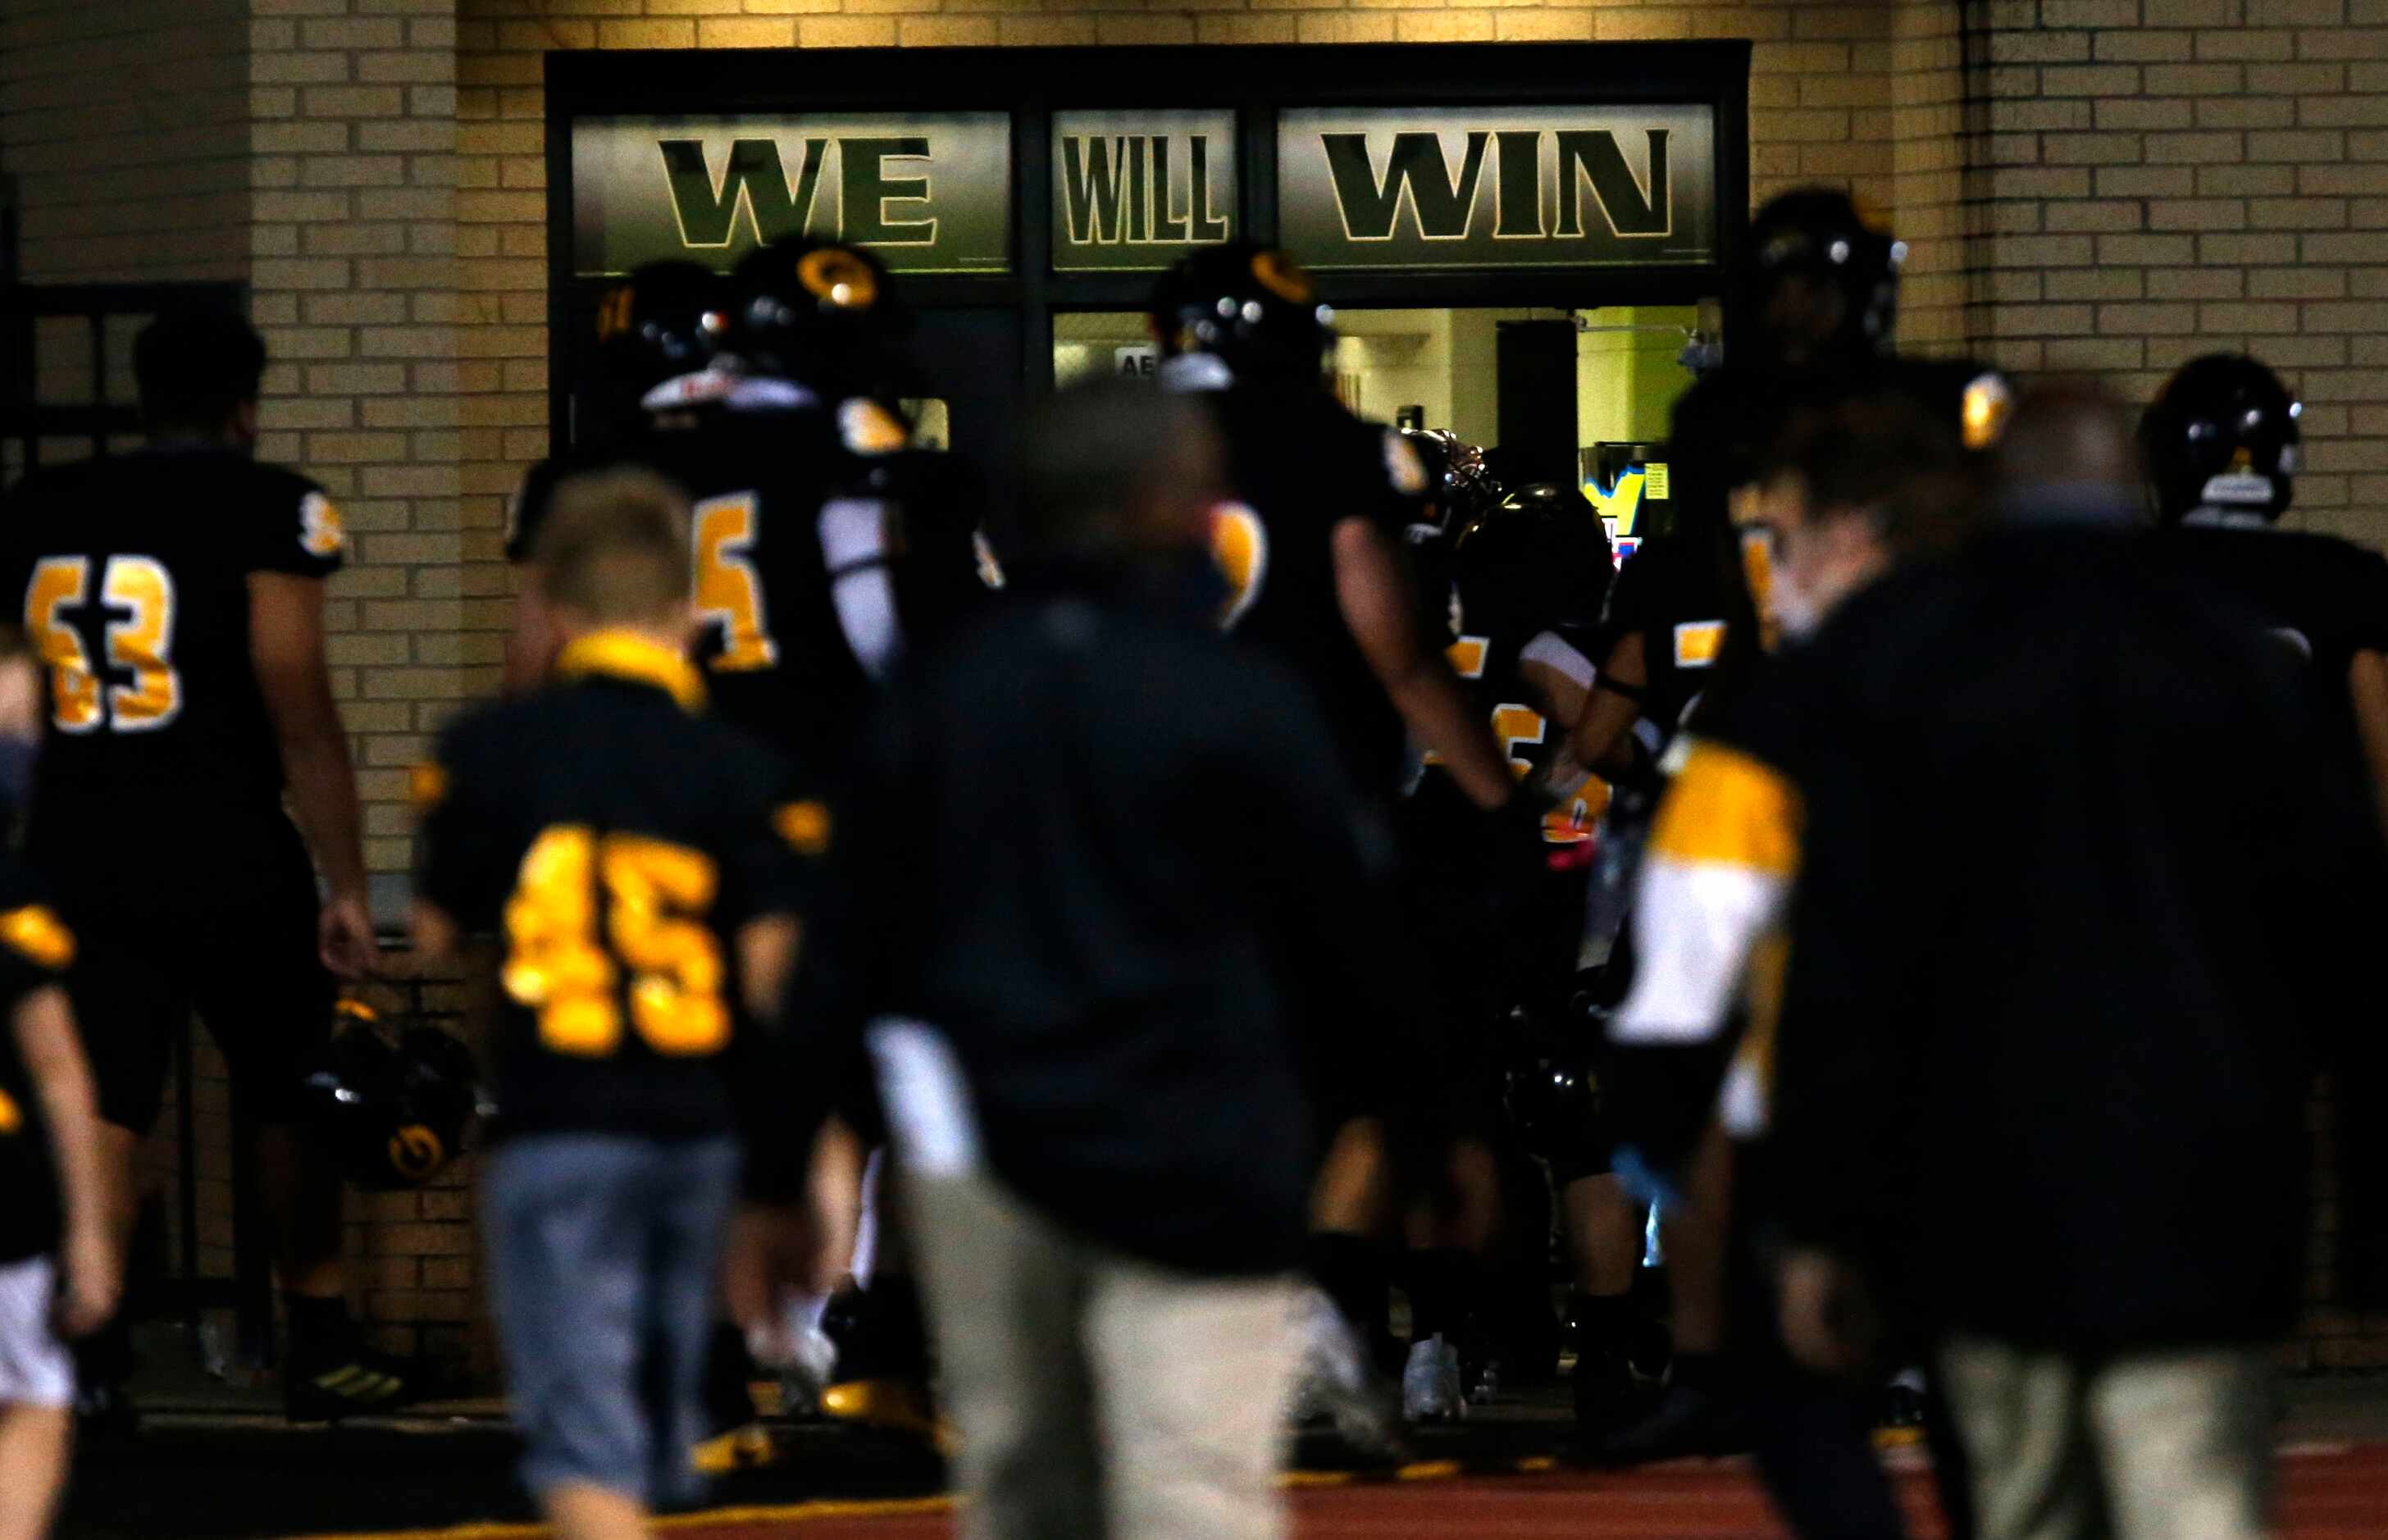 The Garland Owls head to the locker room during half-time, under a window that reads “WE...